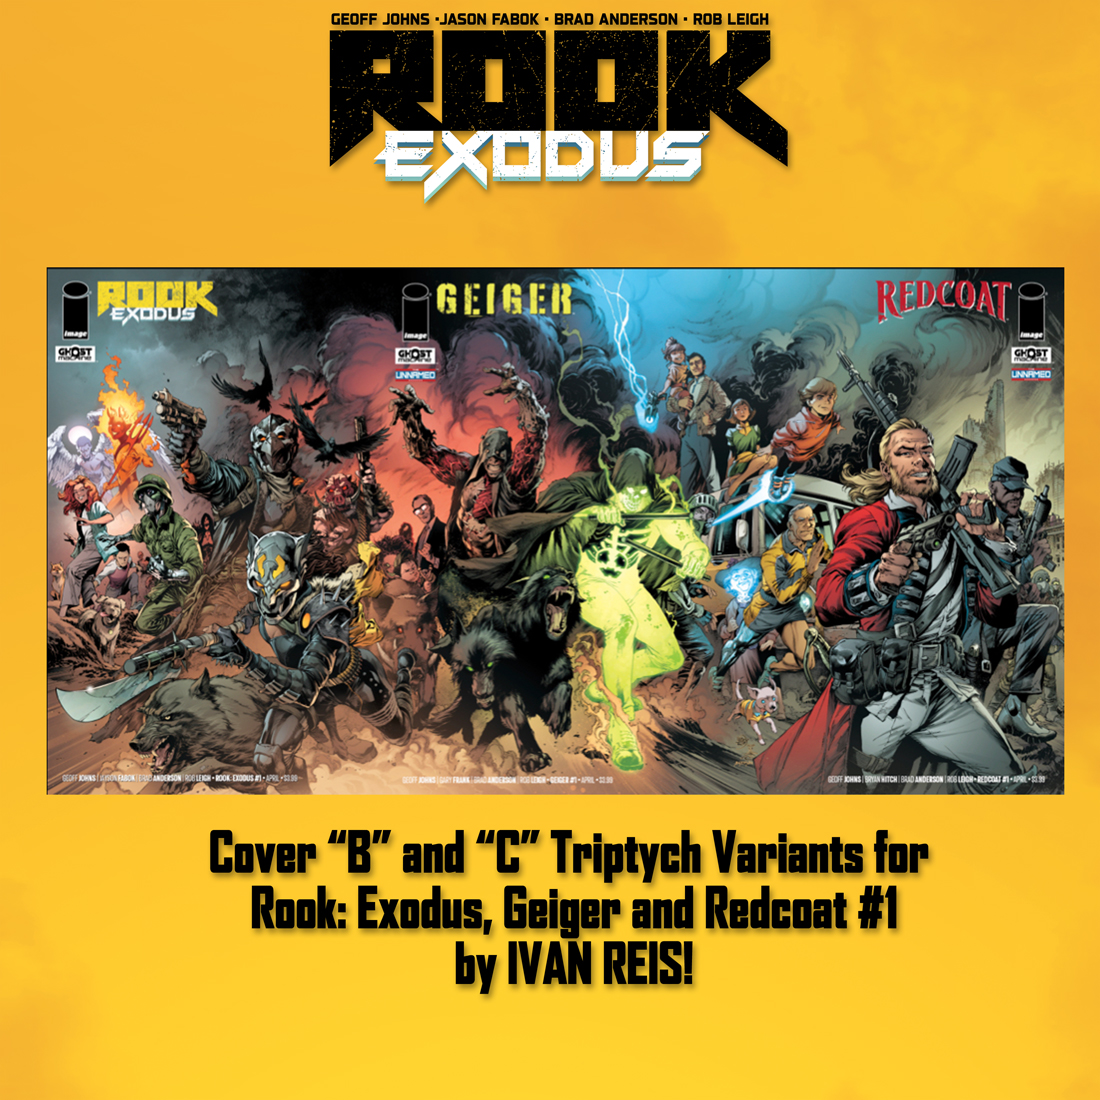 ROOK: EXODUS issue 1 COVER CHECKLIST! Call your local comic shop and pre-order today and add it to your pull list! Rook: Exodus, Geiger and Redcoat #1 launch April 3, 2024! Cover B and C form a triptych image with all three books! Colors by @bdanderson13 @ImageComics